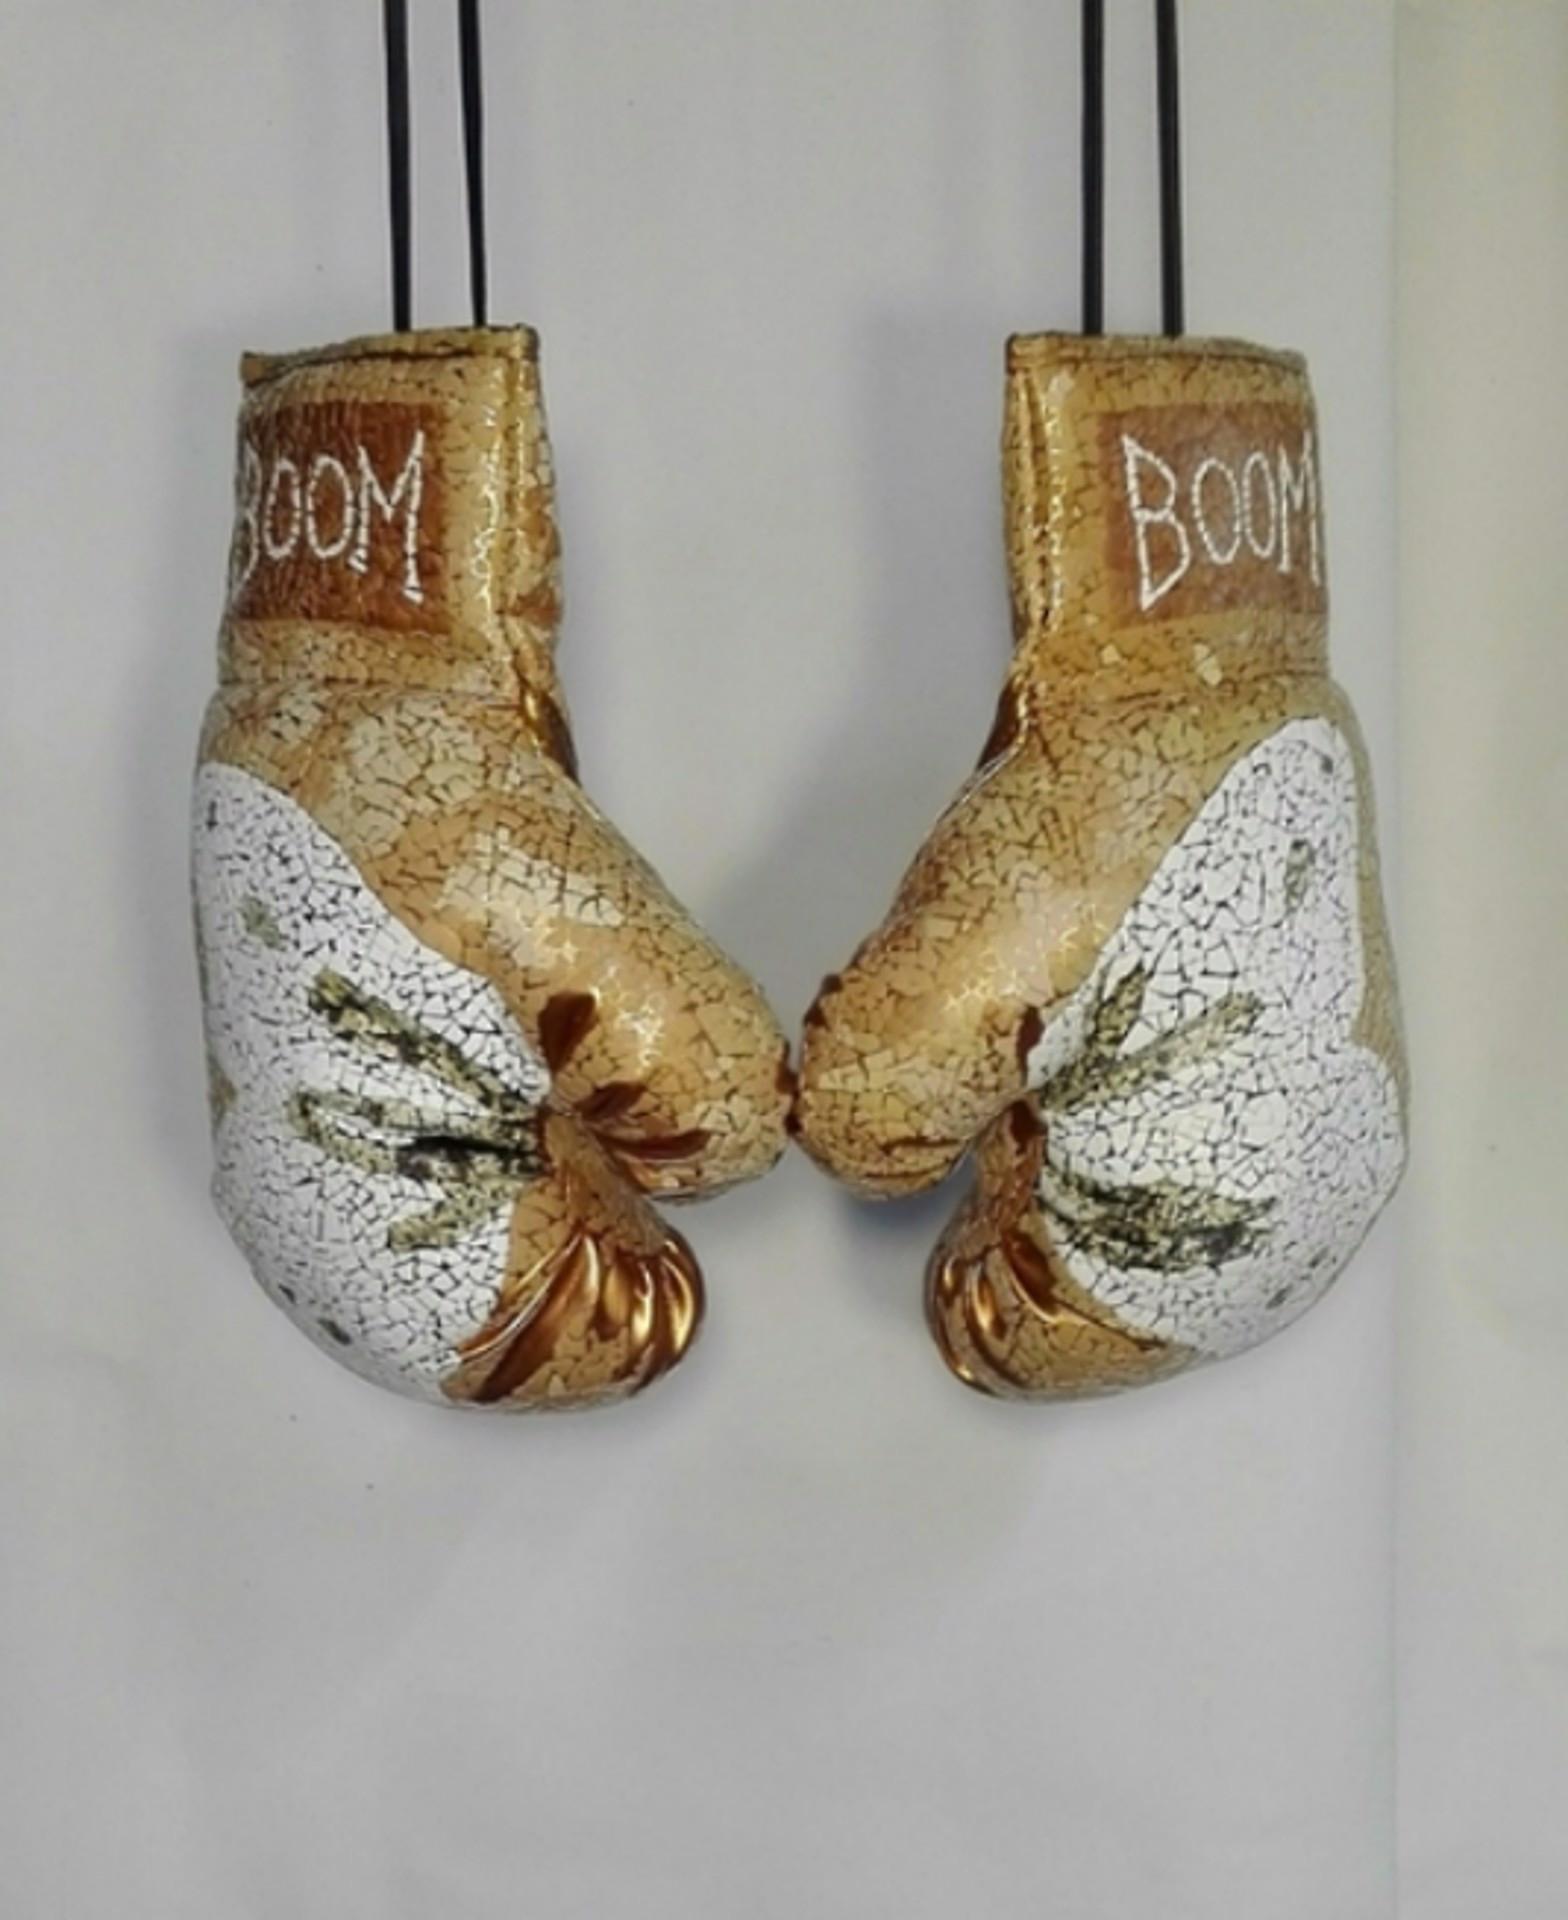 Boom Boom Butterfly- Hand Embellished Boxing Gloves, Mixed Media Sculpture - Mixed Media Art by MyLoan Dinh